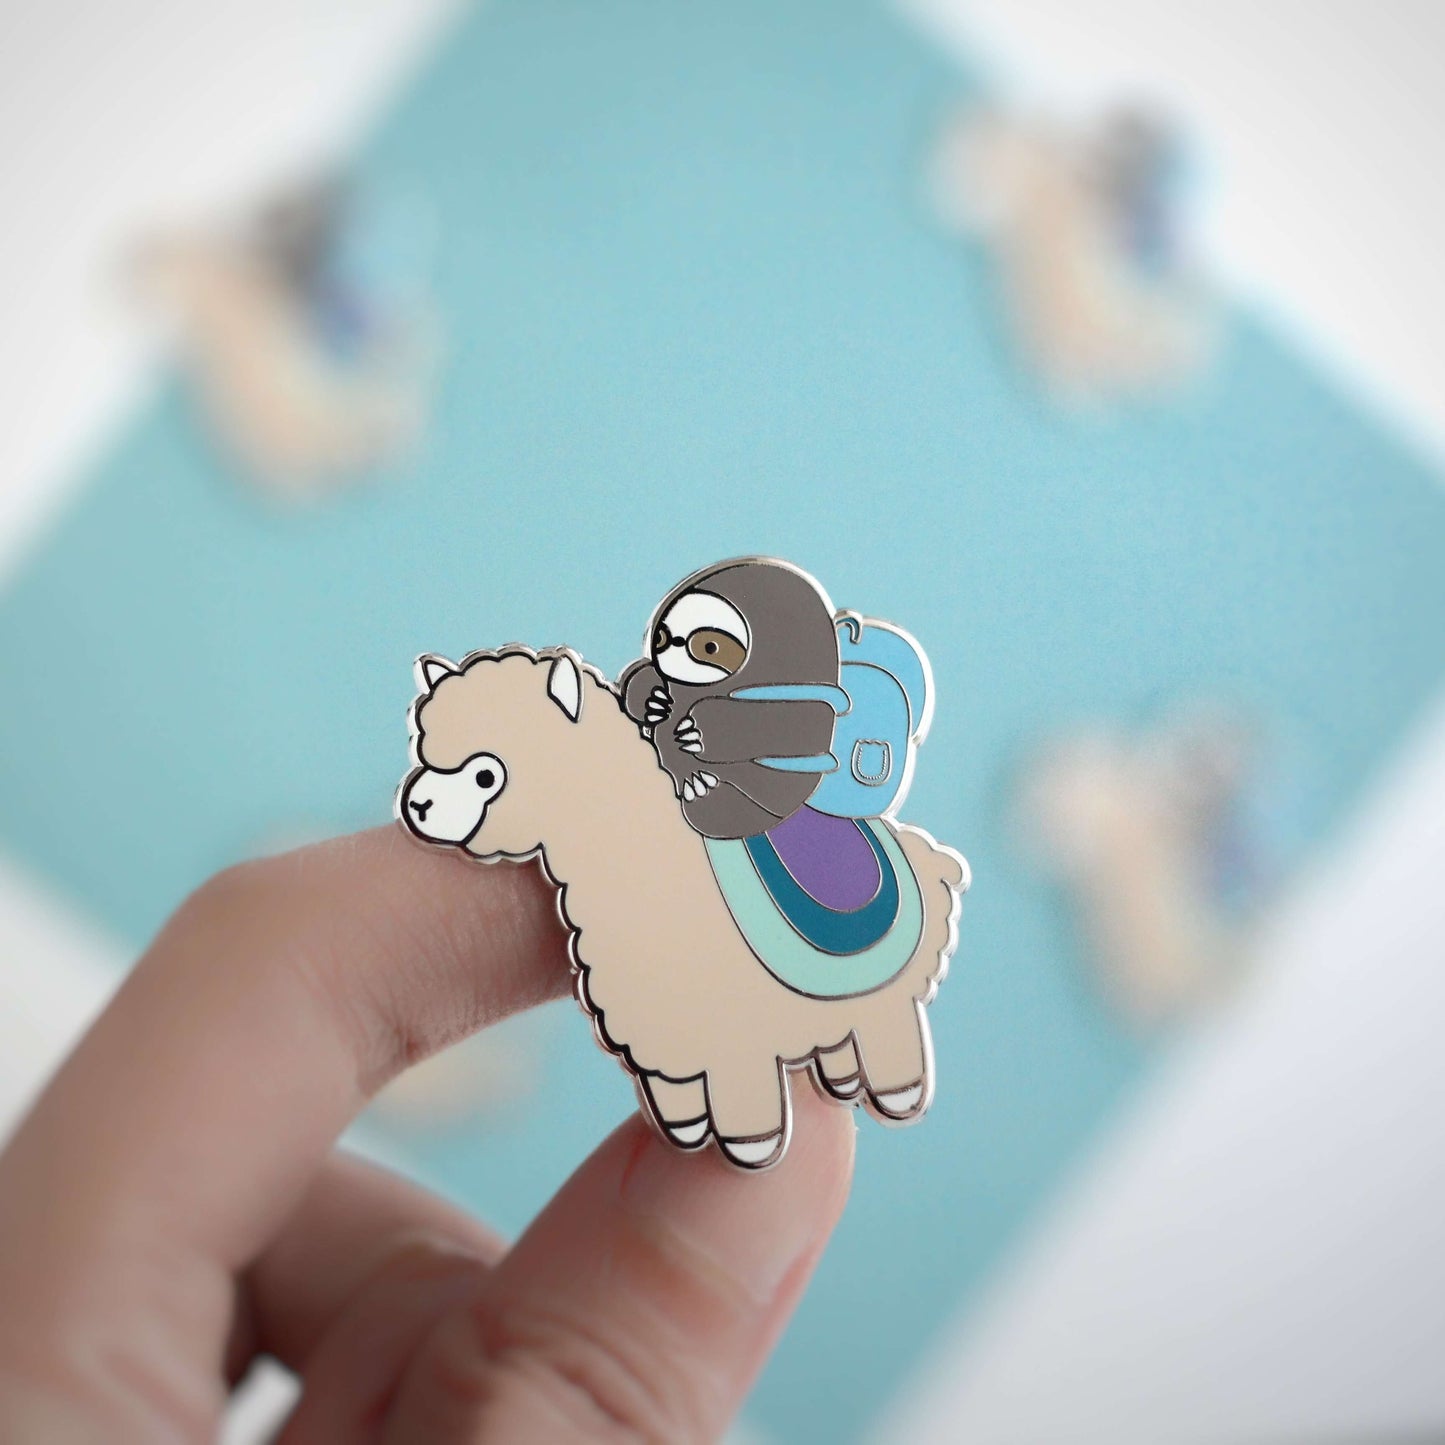 Sloth and Alpaca Adventurer Enamel Pin (Silver) - Llama Pin for Backpack - Sloth Gift by Wild Whimsy Woolies